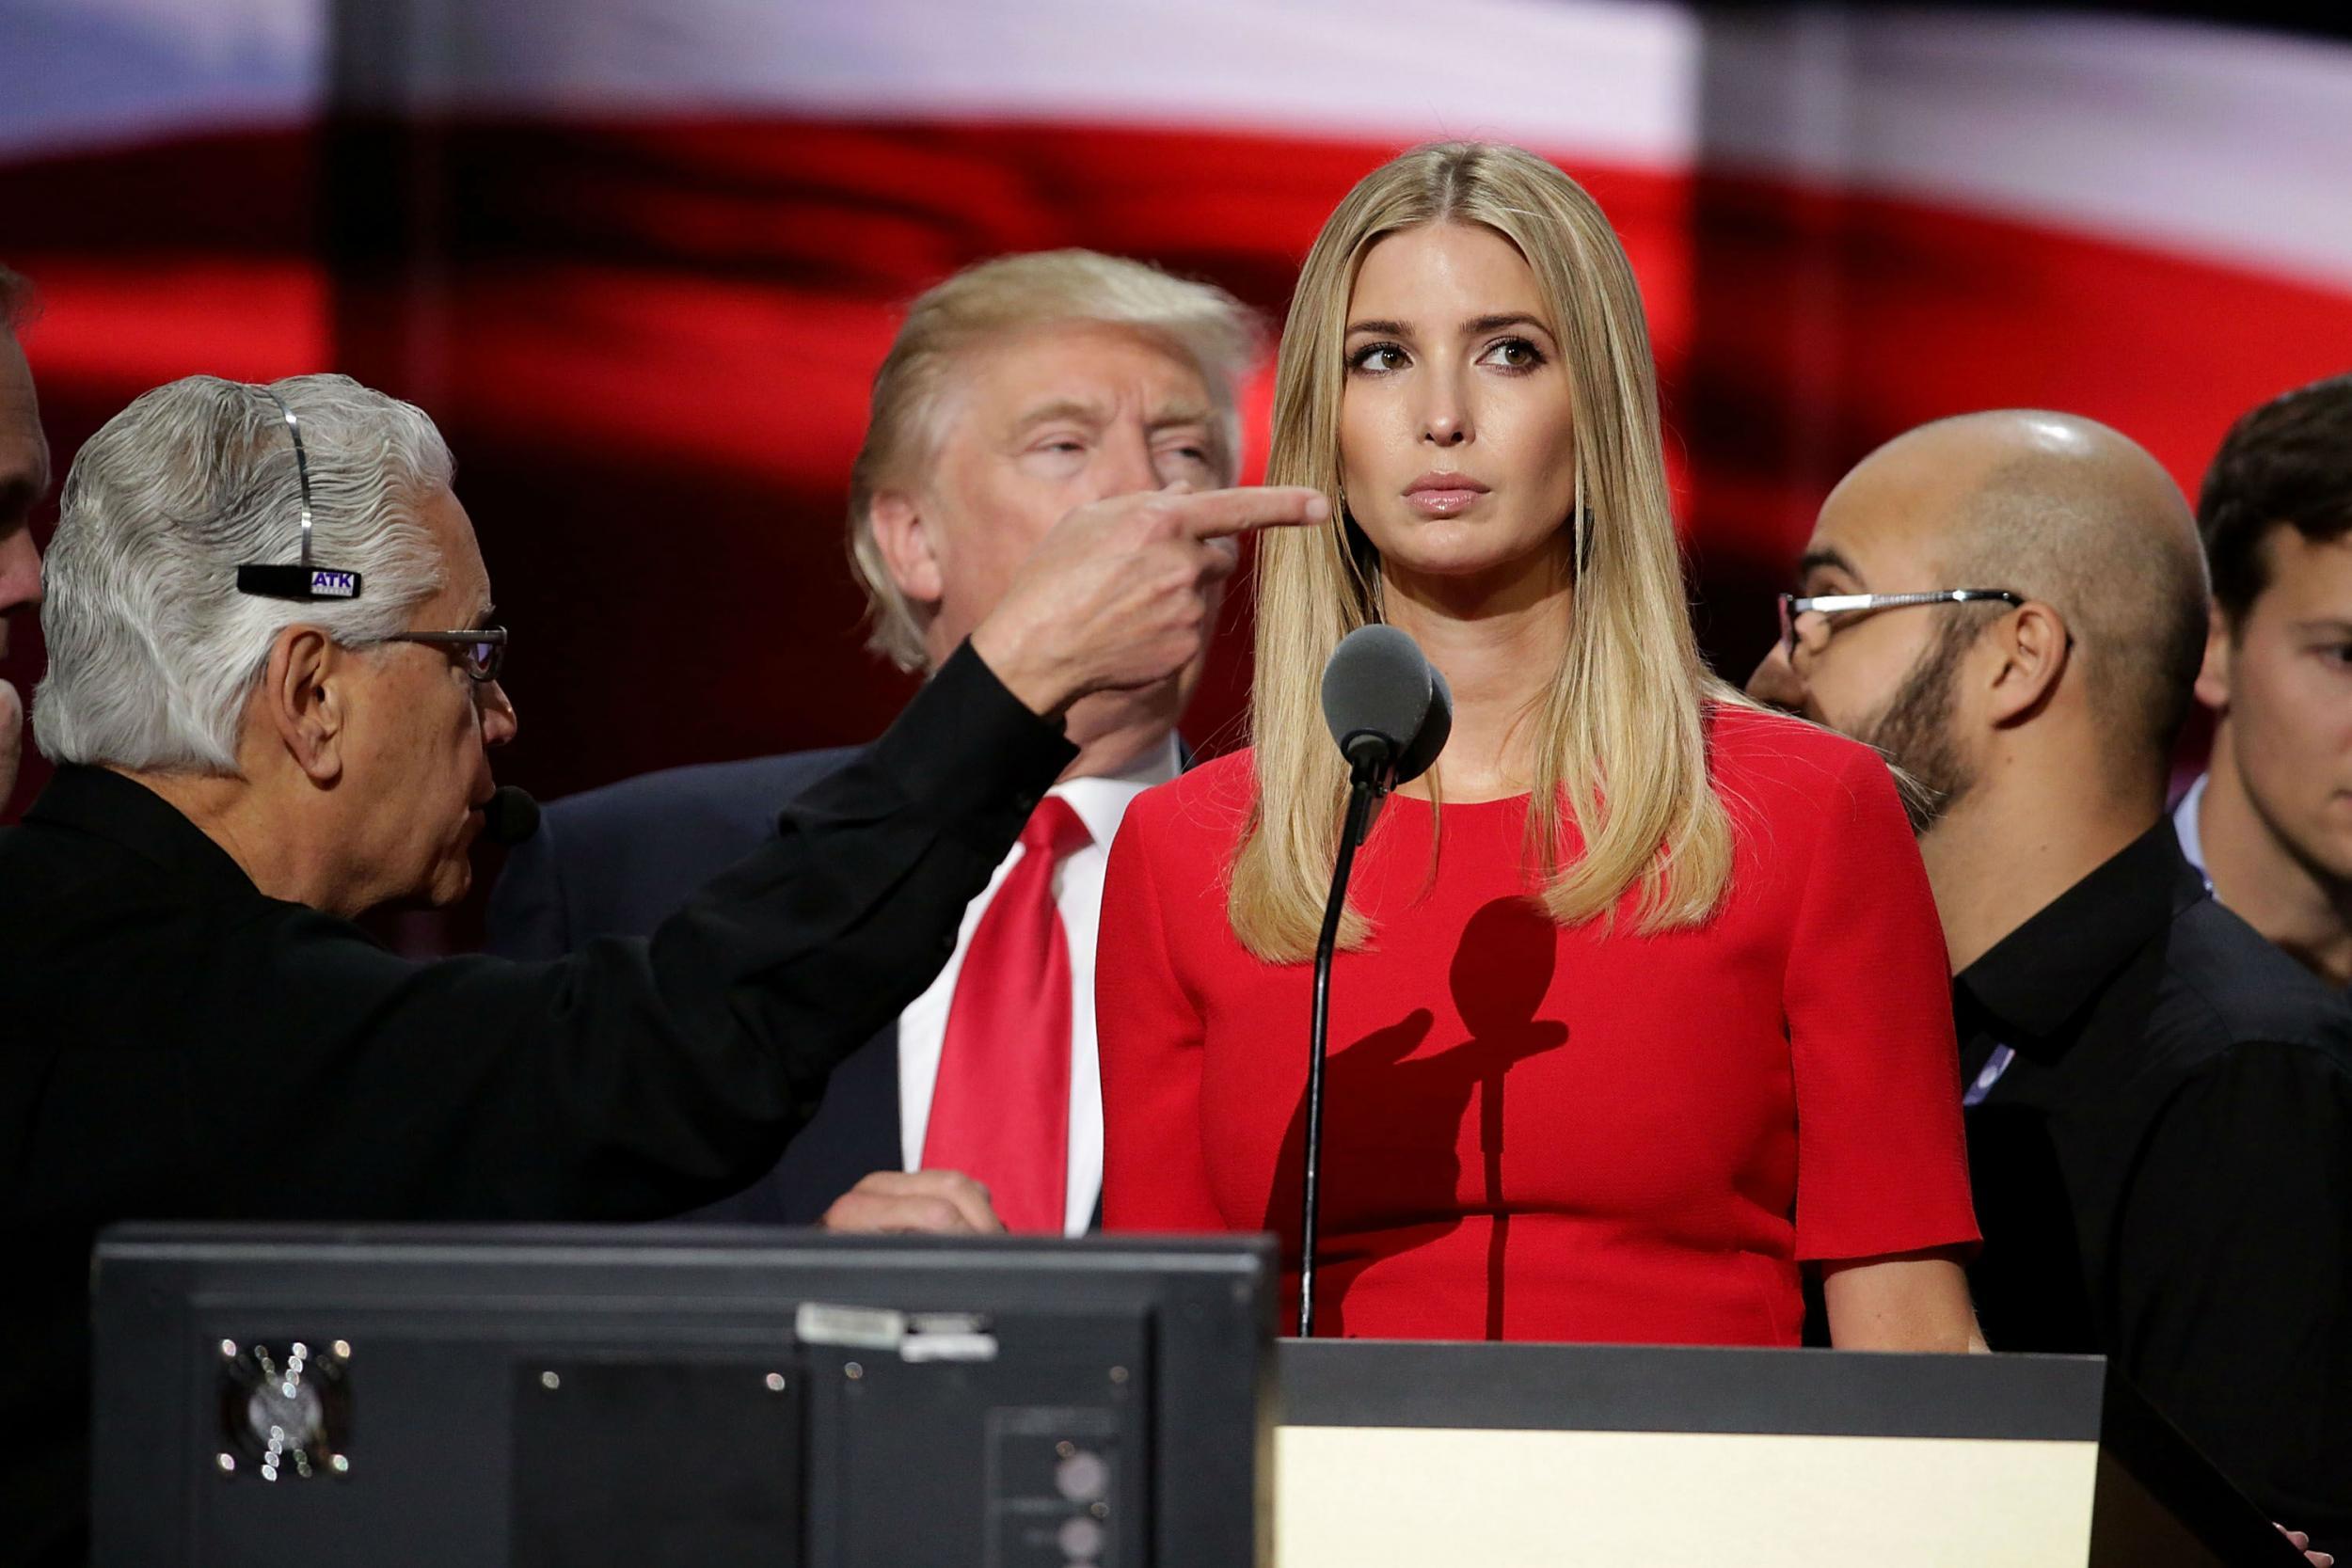 Trump accompanied by Ivanka inspects the arena stage before his address